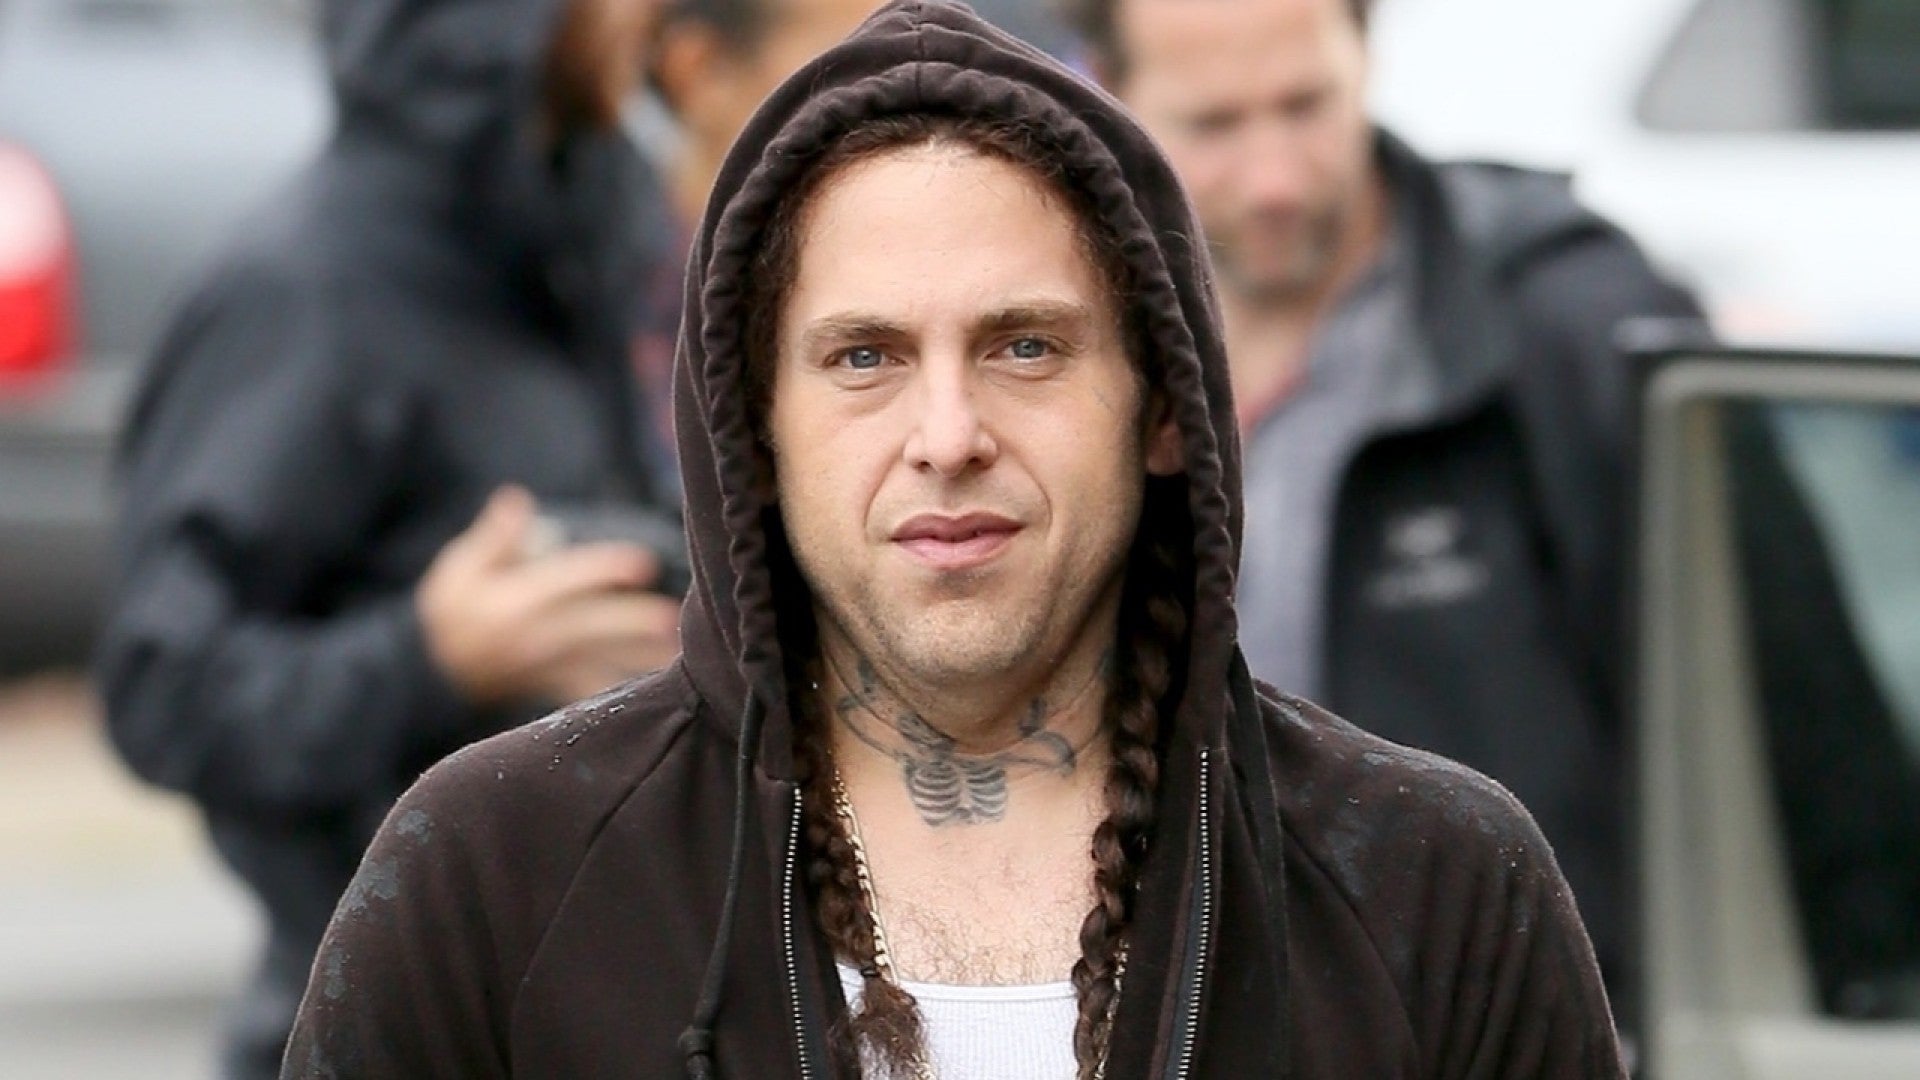 Jonah Hill's Transformation Continues To Stun Us All - SHEfinds